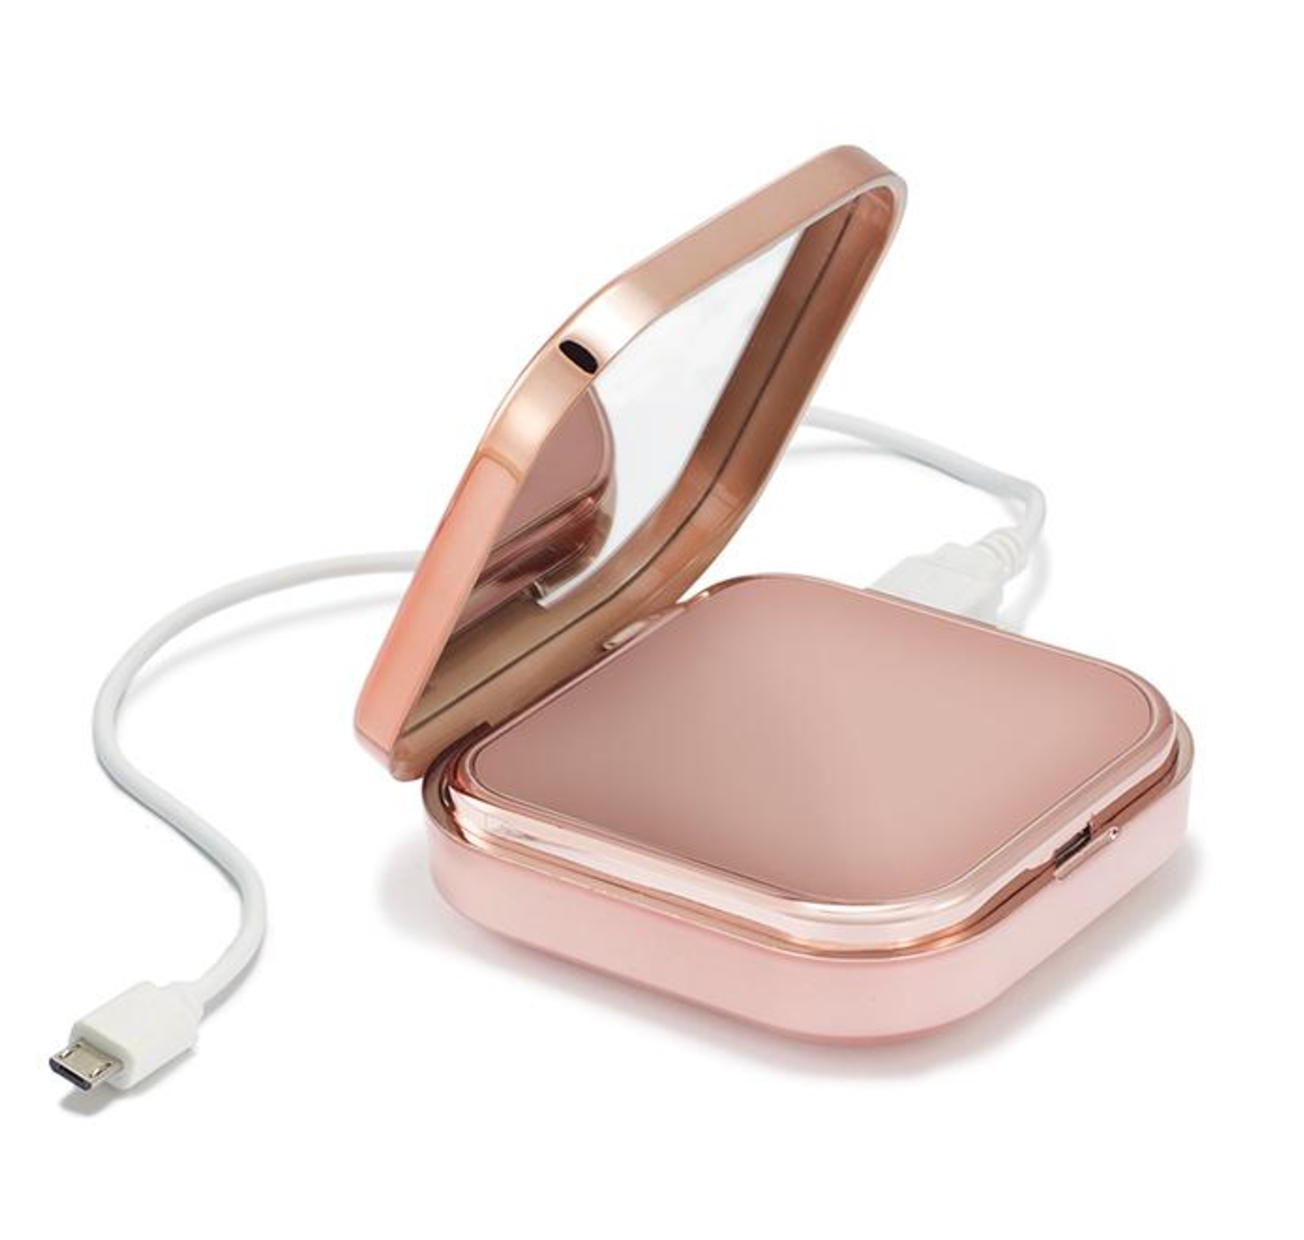 Avon Metallic Power Charger and Mirror